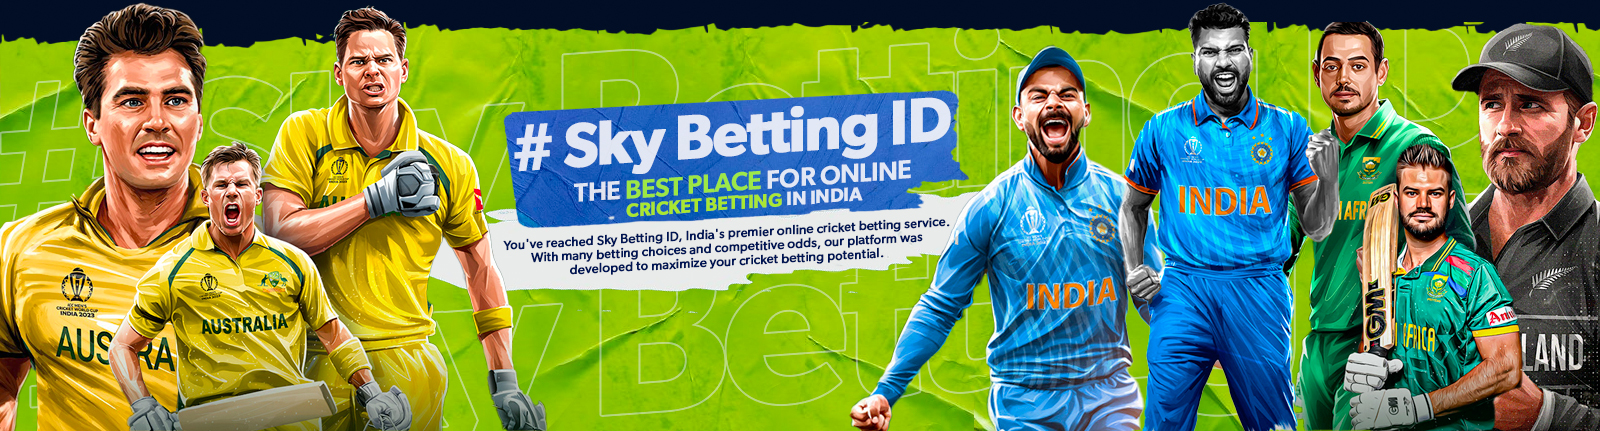 Online Cricket Betting ID | Best Cricket Provider in India